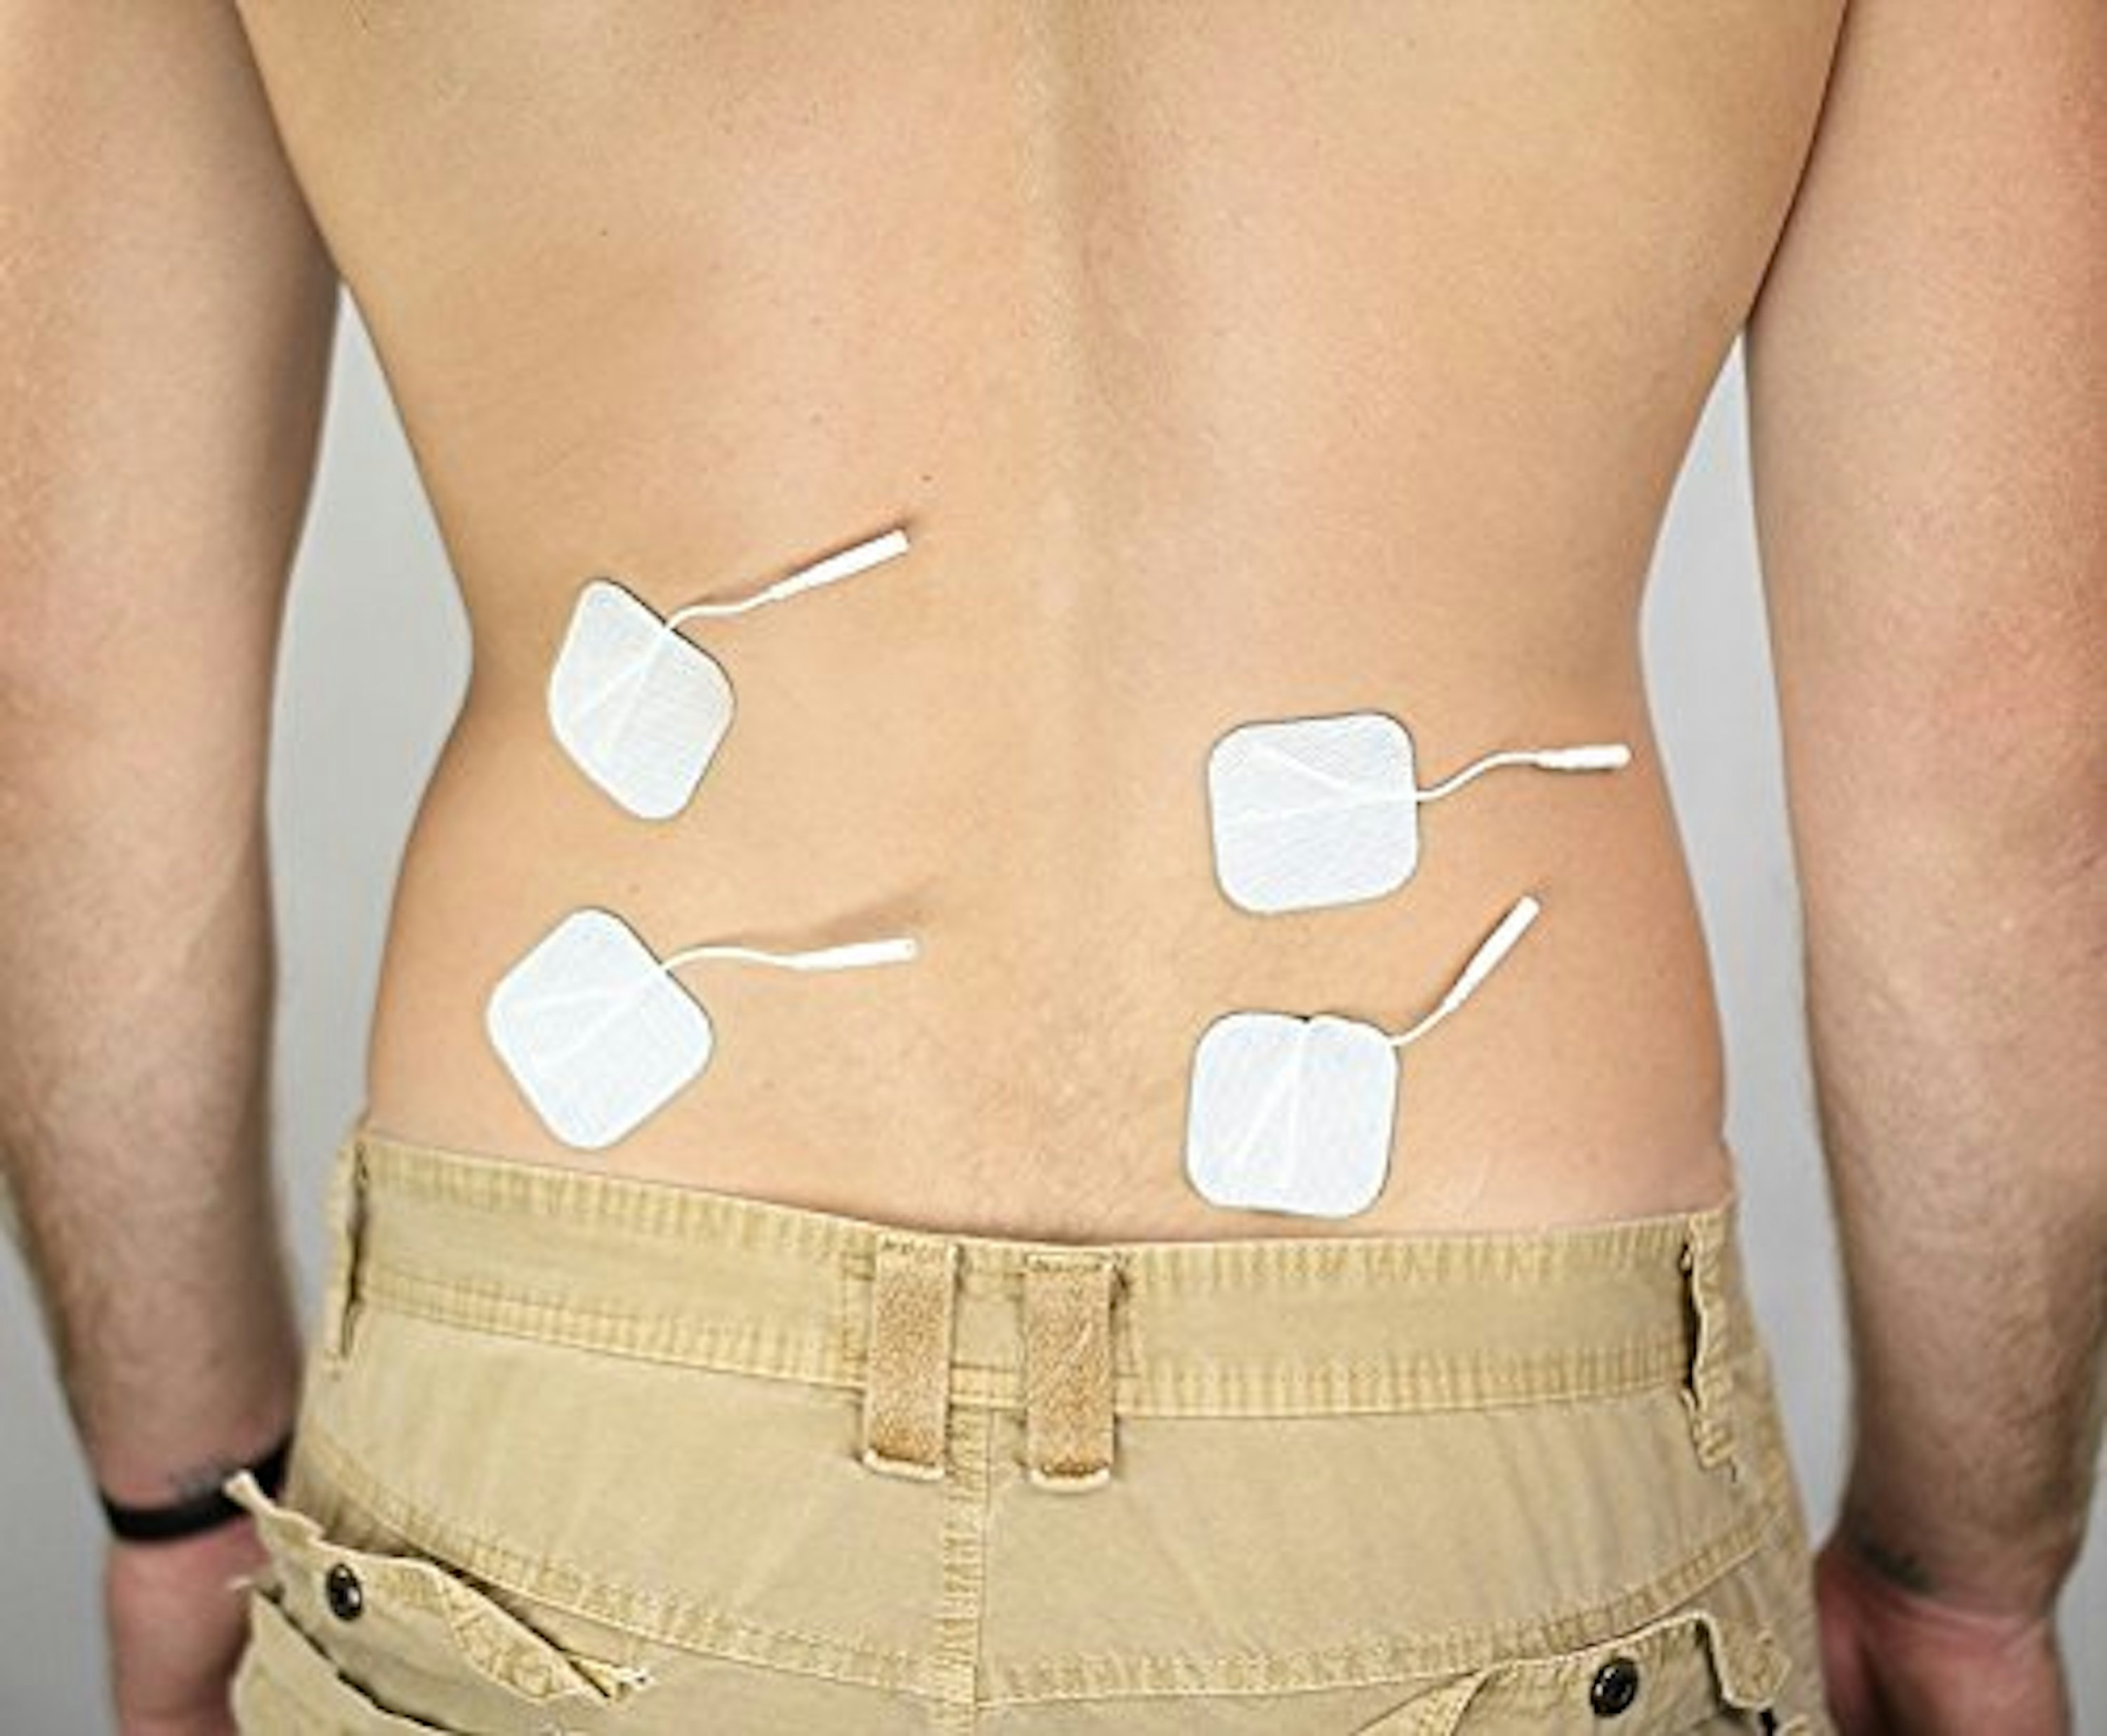 Ortable tens unit pads